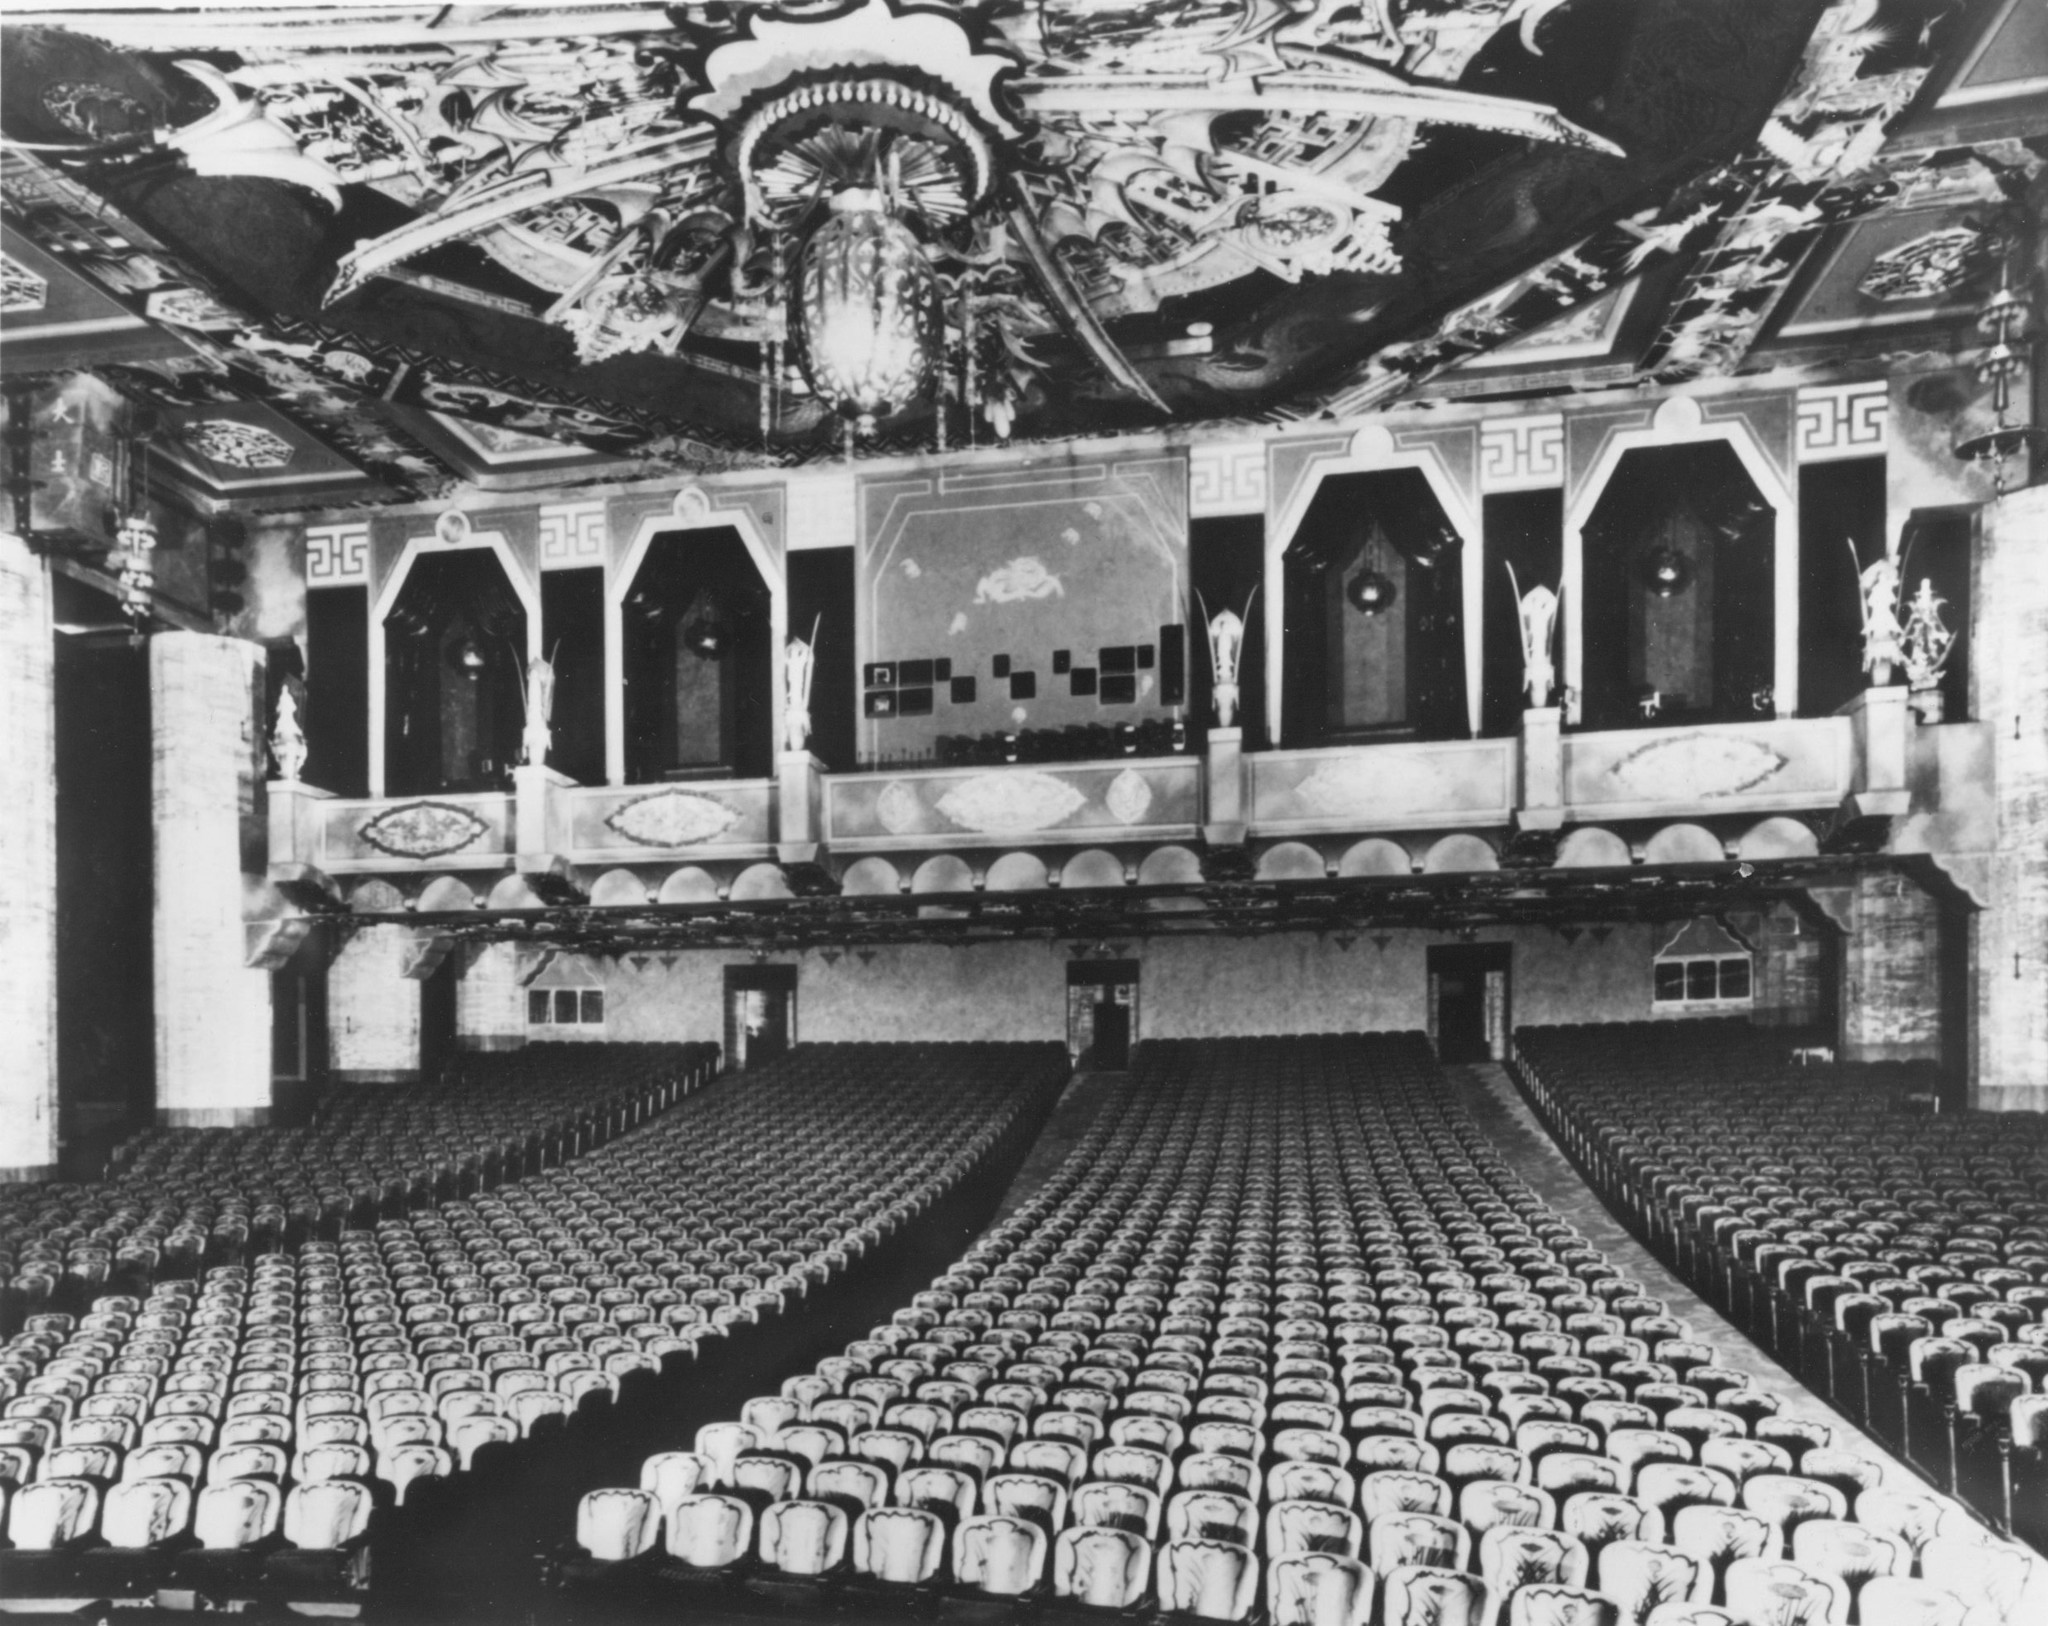 A vintage shot of the inside the Chinese-themed movie palace that Sid Grauman built.